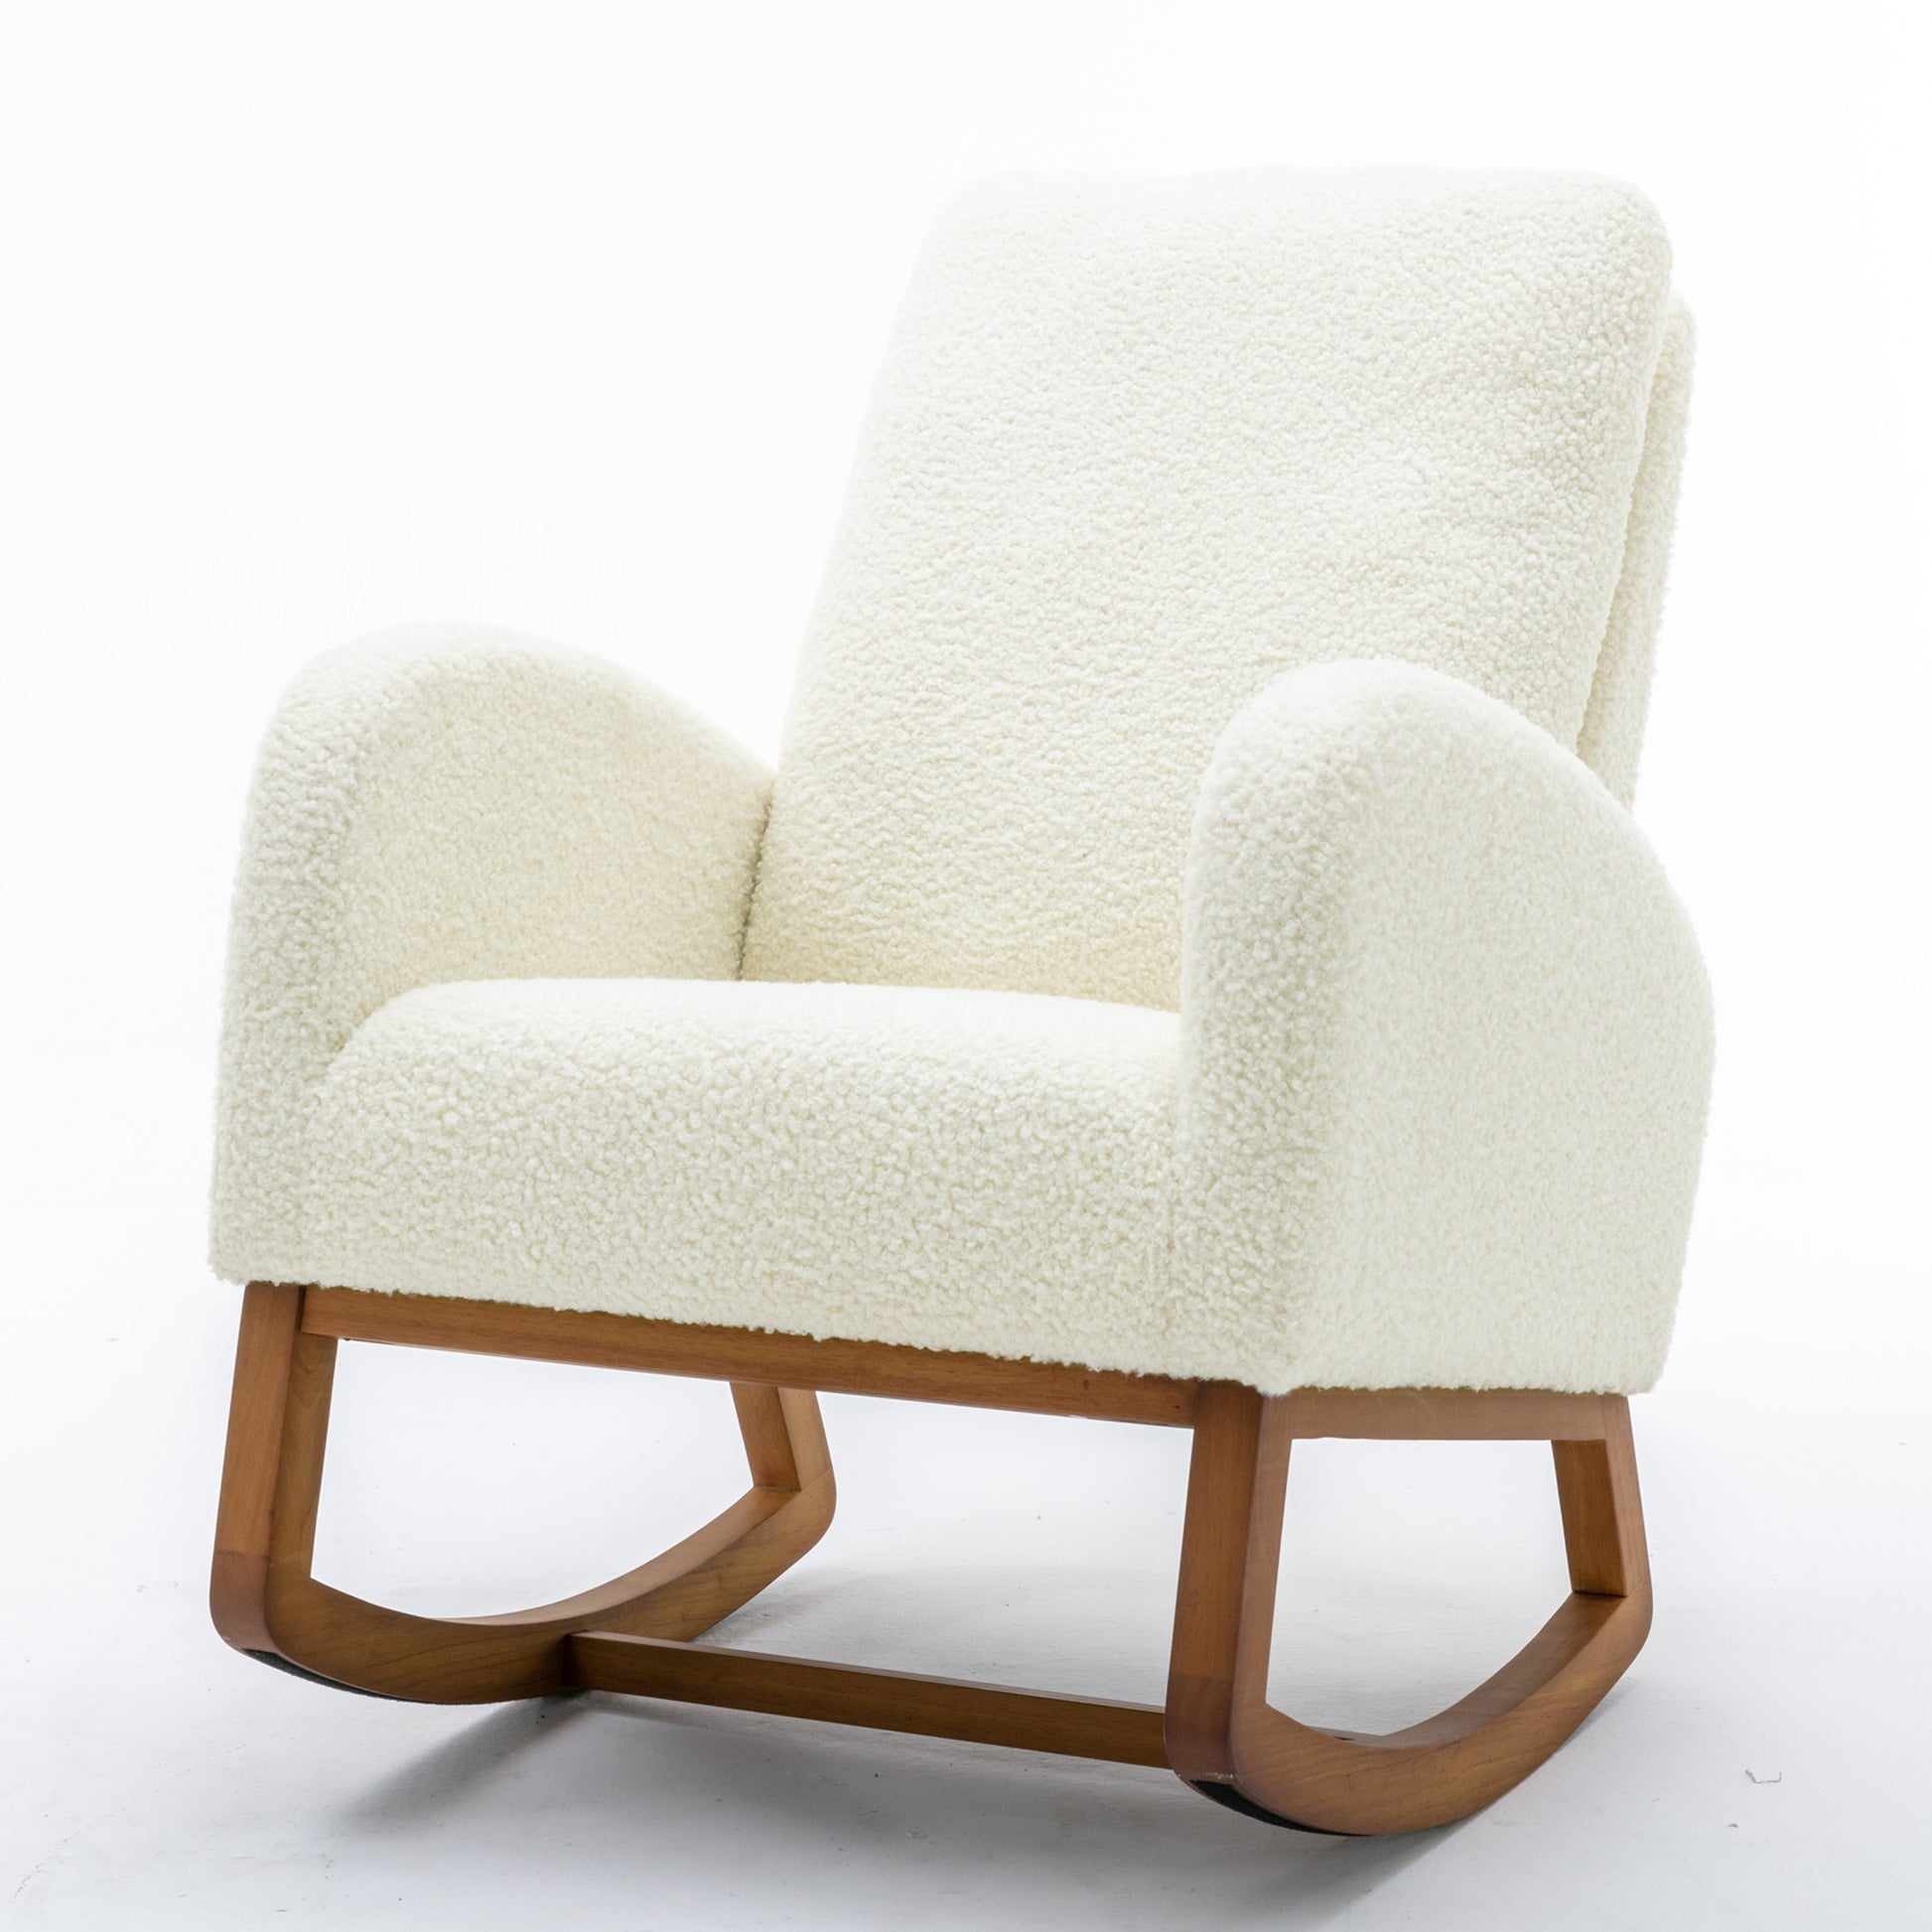 Coolmore Living Room Comfortable Rocking Chair